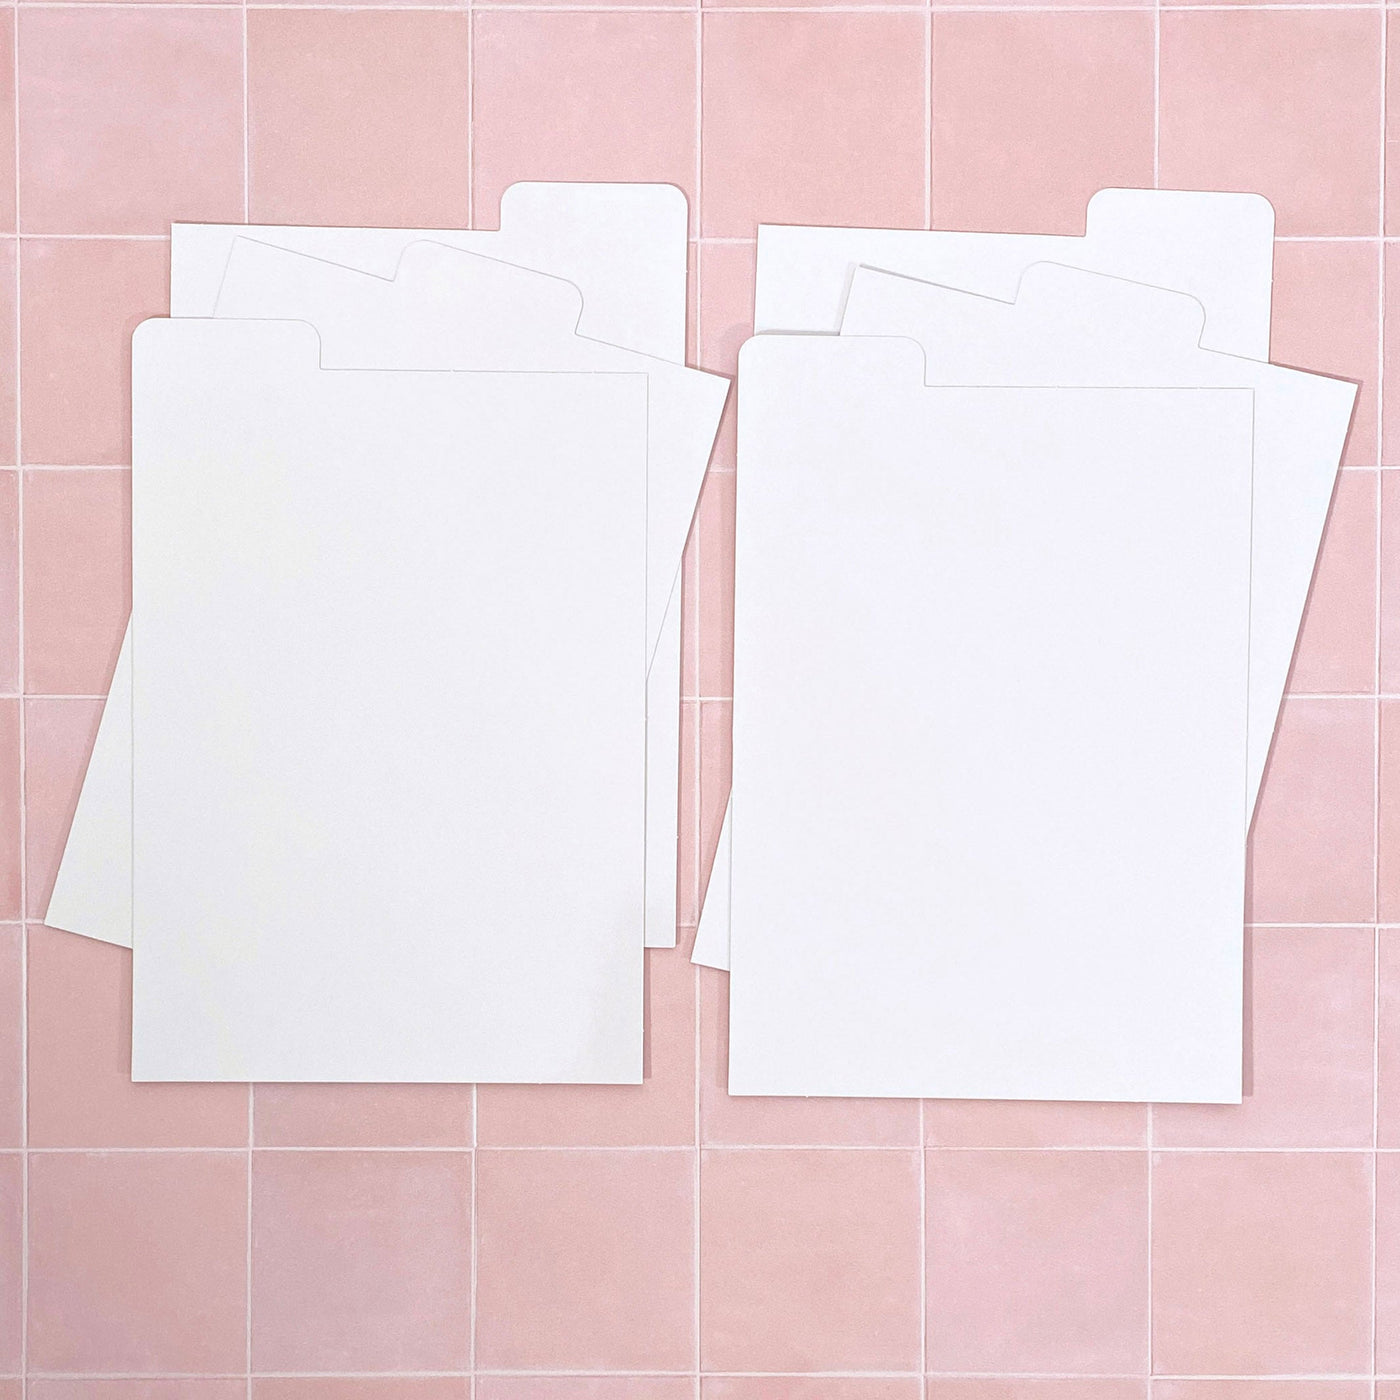 Cling & Store White Tabbed Dividers - Large